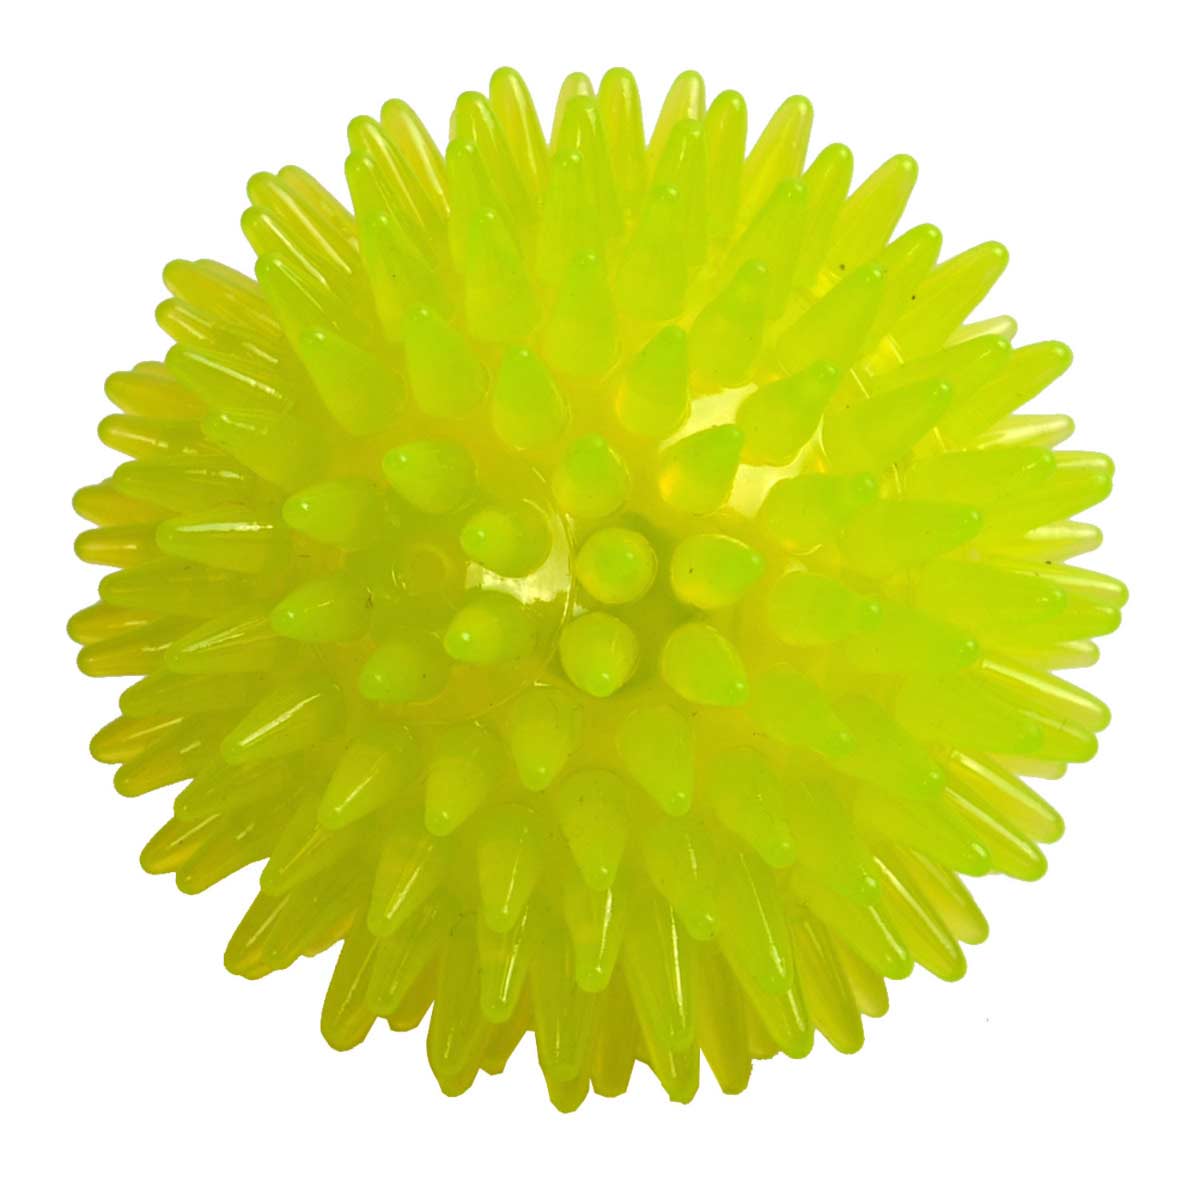 Yellow sound ball with light - dog toy